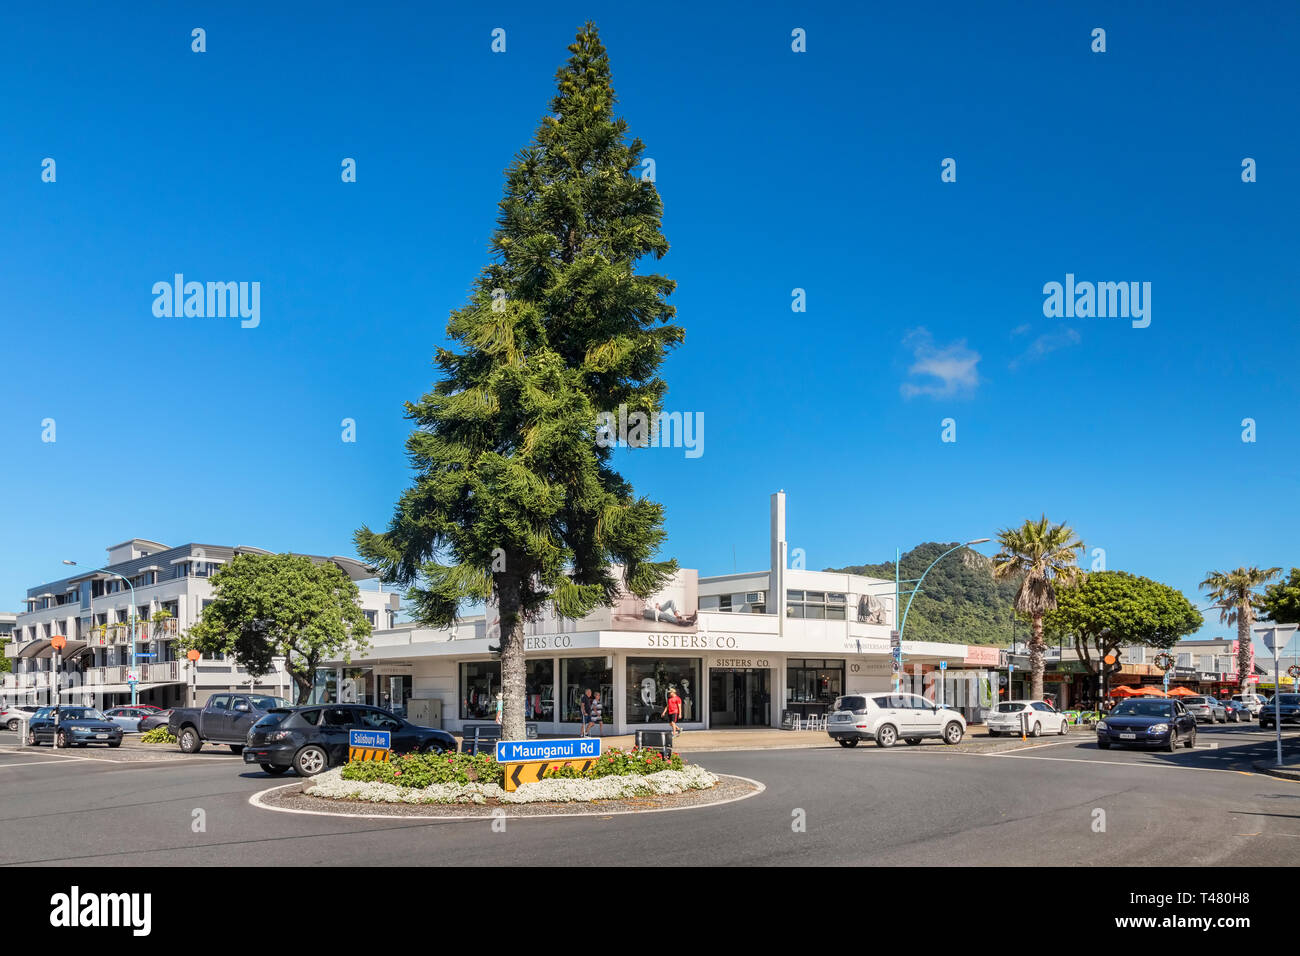 16 December 2018: Mount Maunganui, New Zealand - Intersection and roundabout in Mount Maunganui centre. Stock Photo